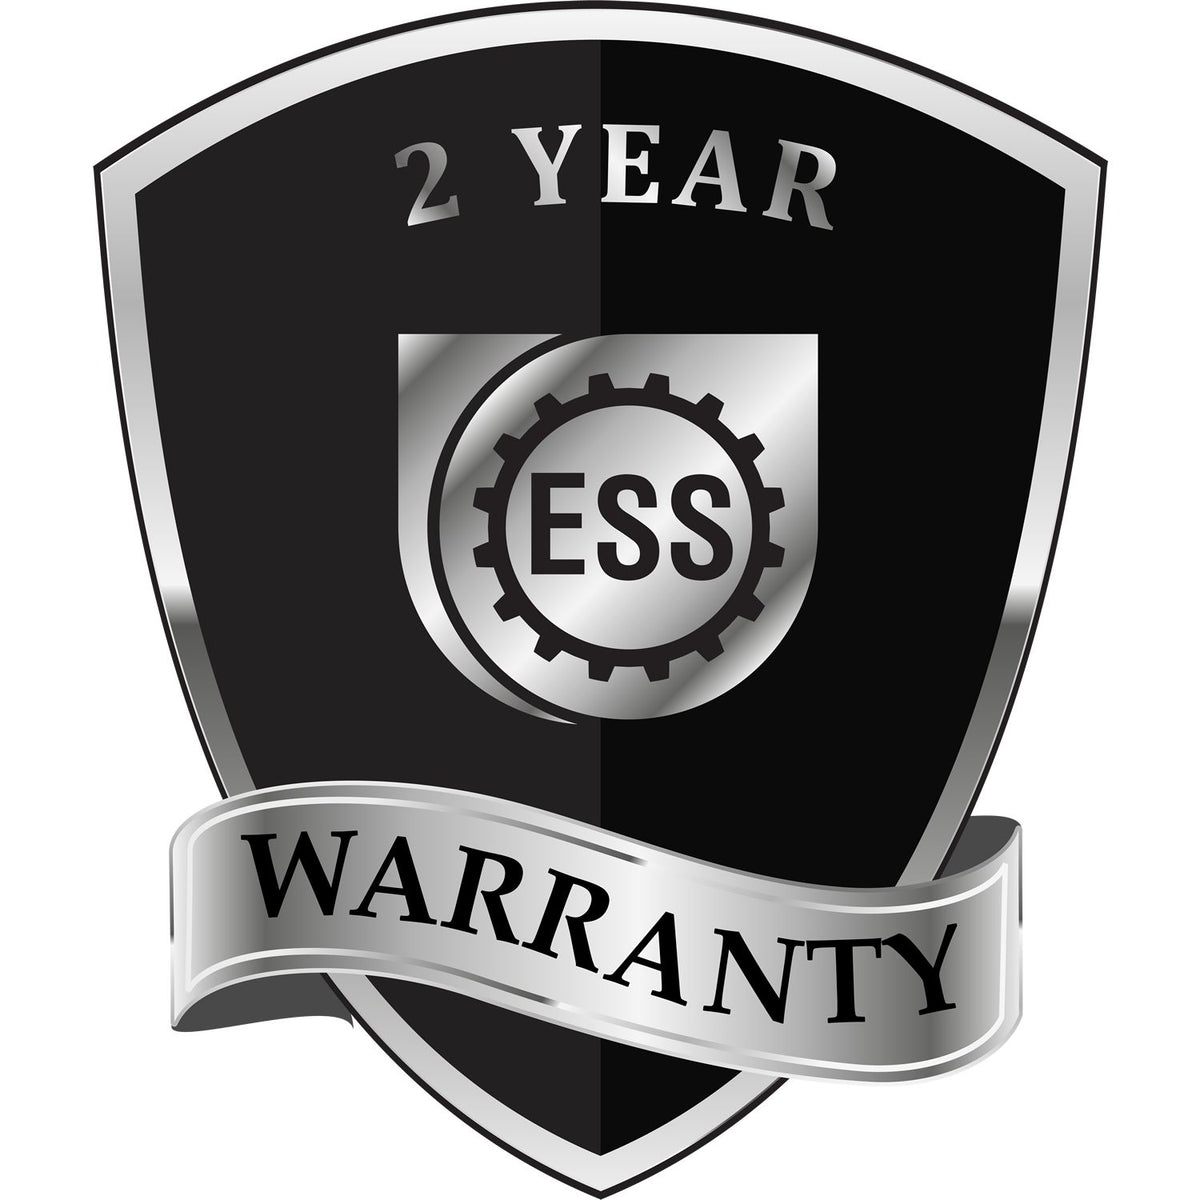 A black and silver badge or emblem showing warranty information for the Handheld Pennsylvania Professional Geologist Embosser